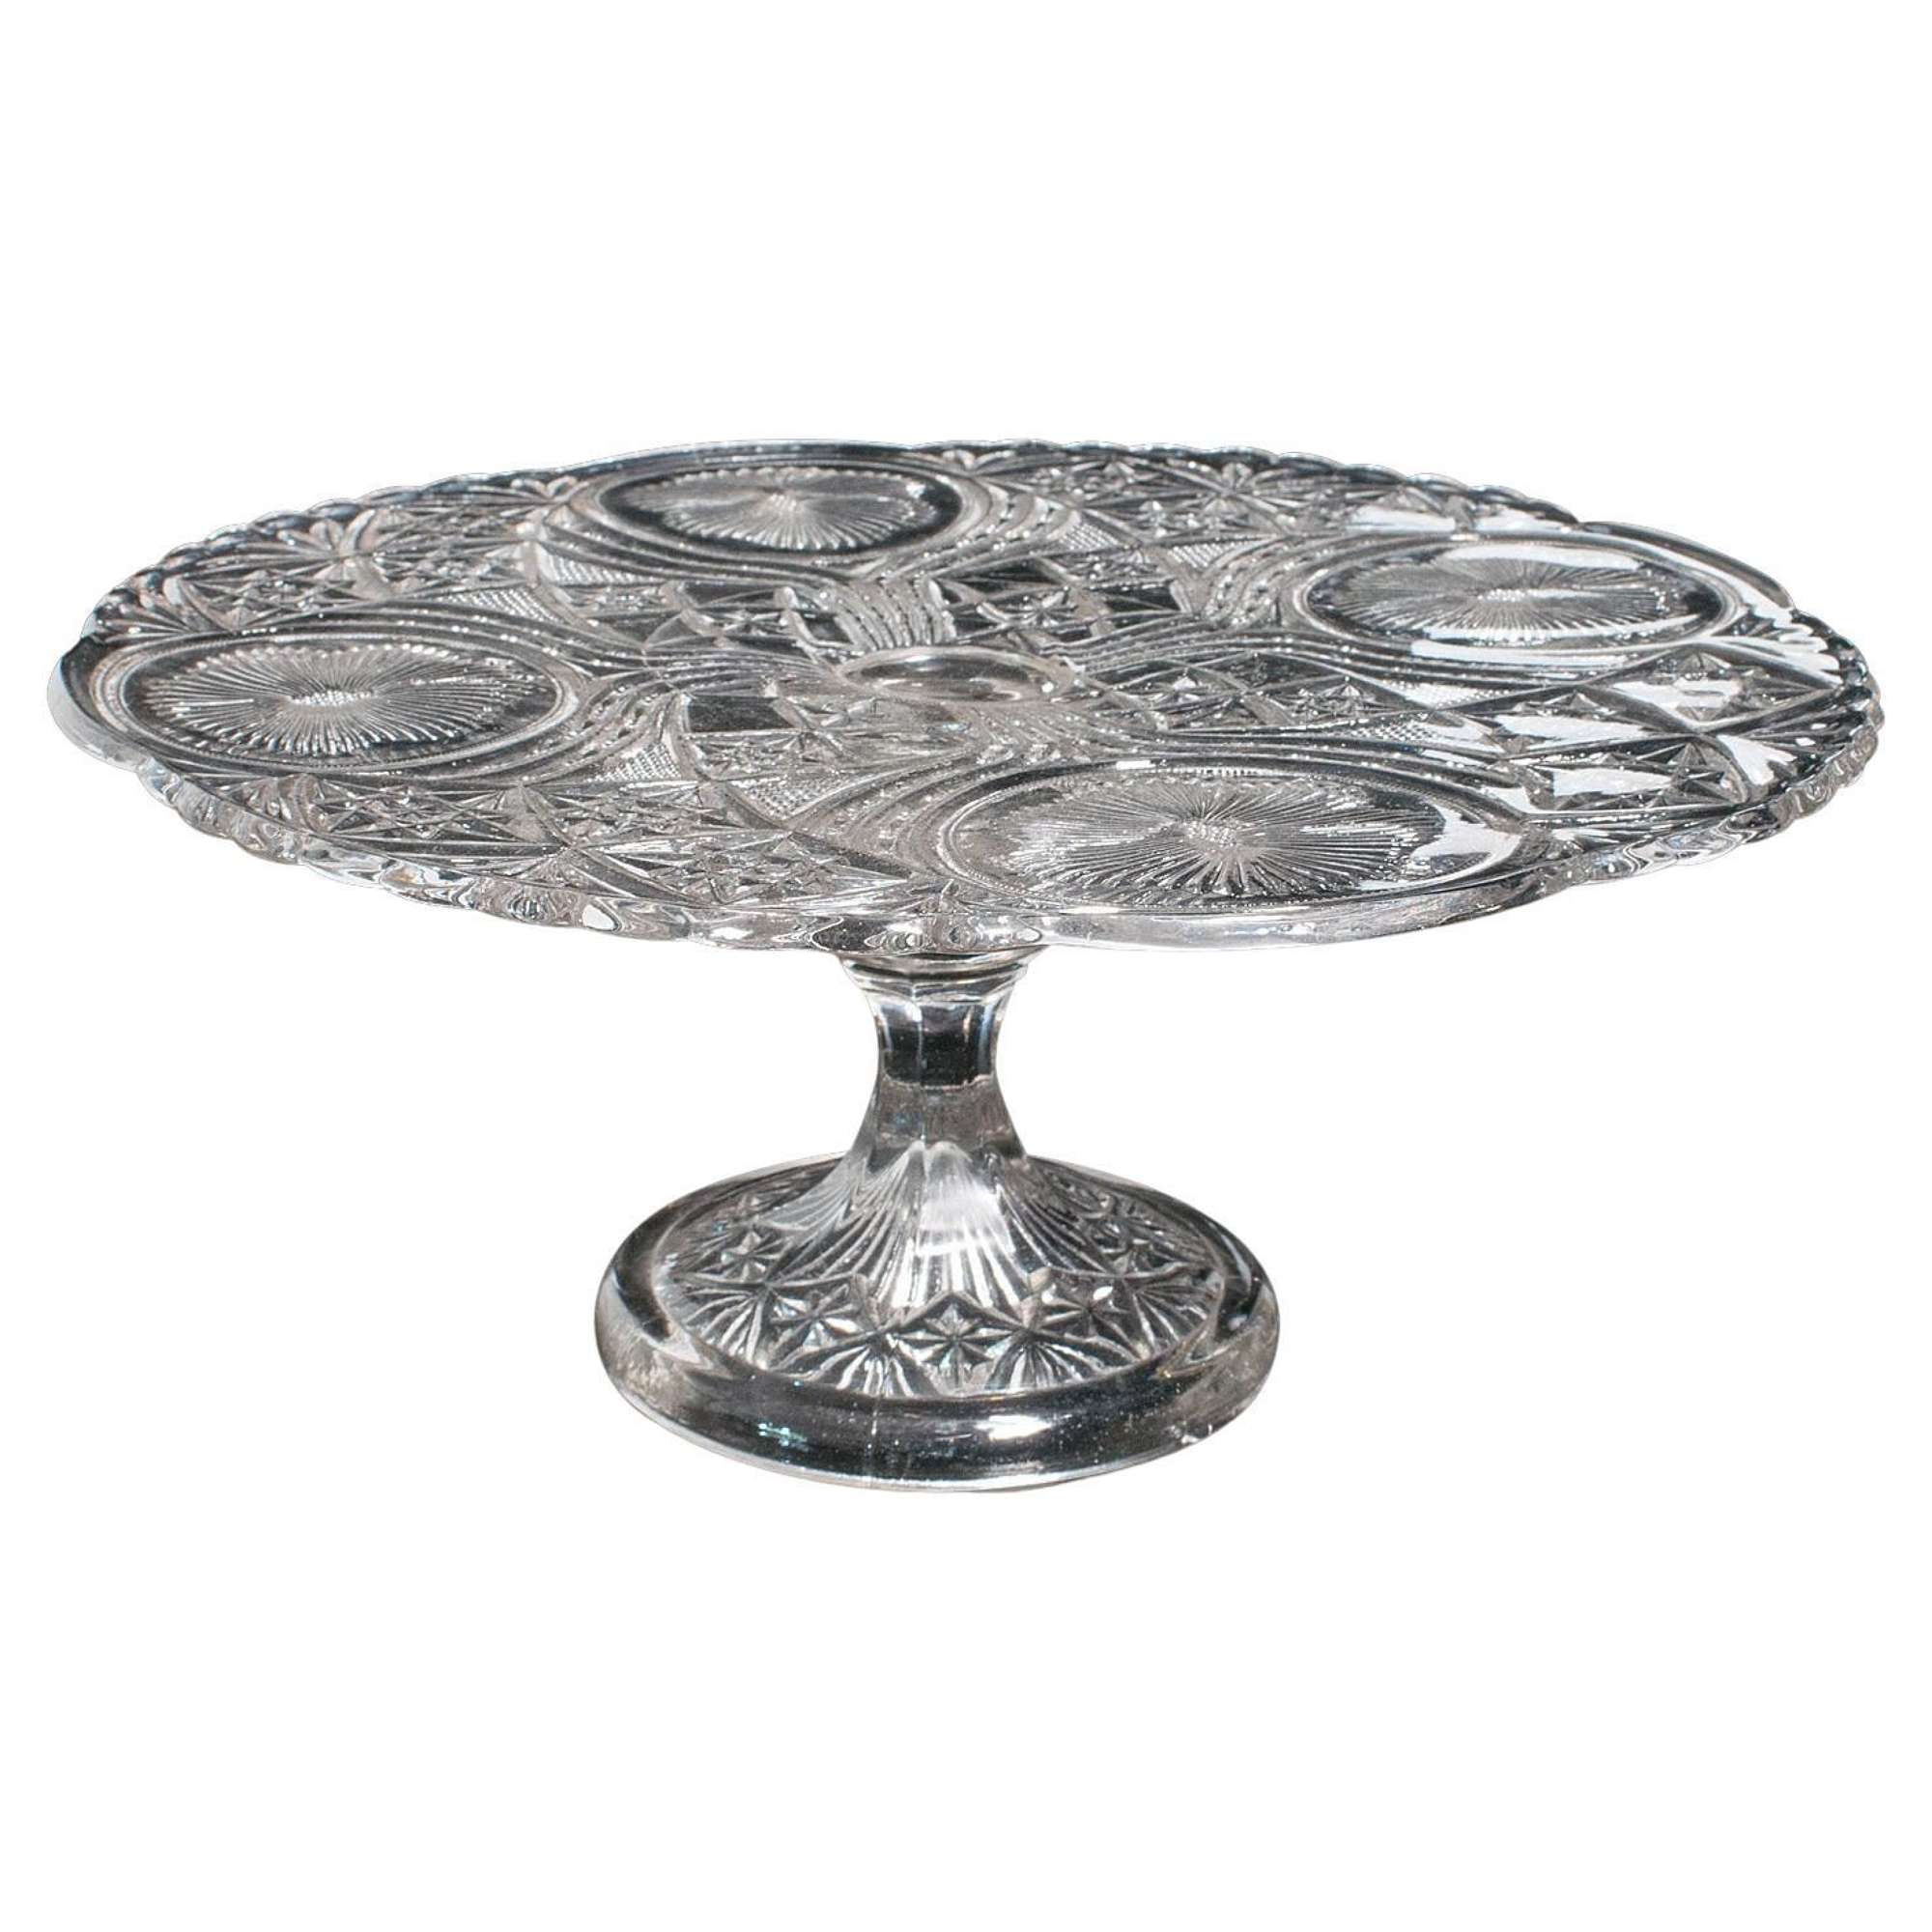 Vintage Cake Stand, French, Cut Glass, Afternoon Tea Serving Platter, Circa 1950